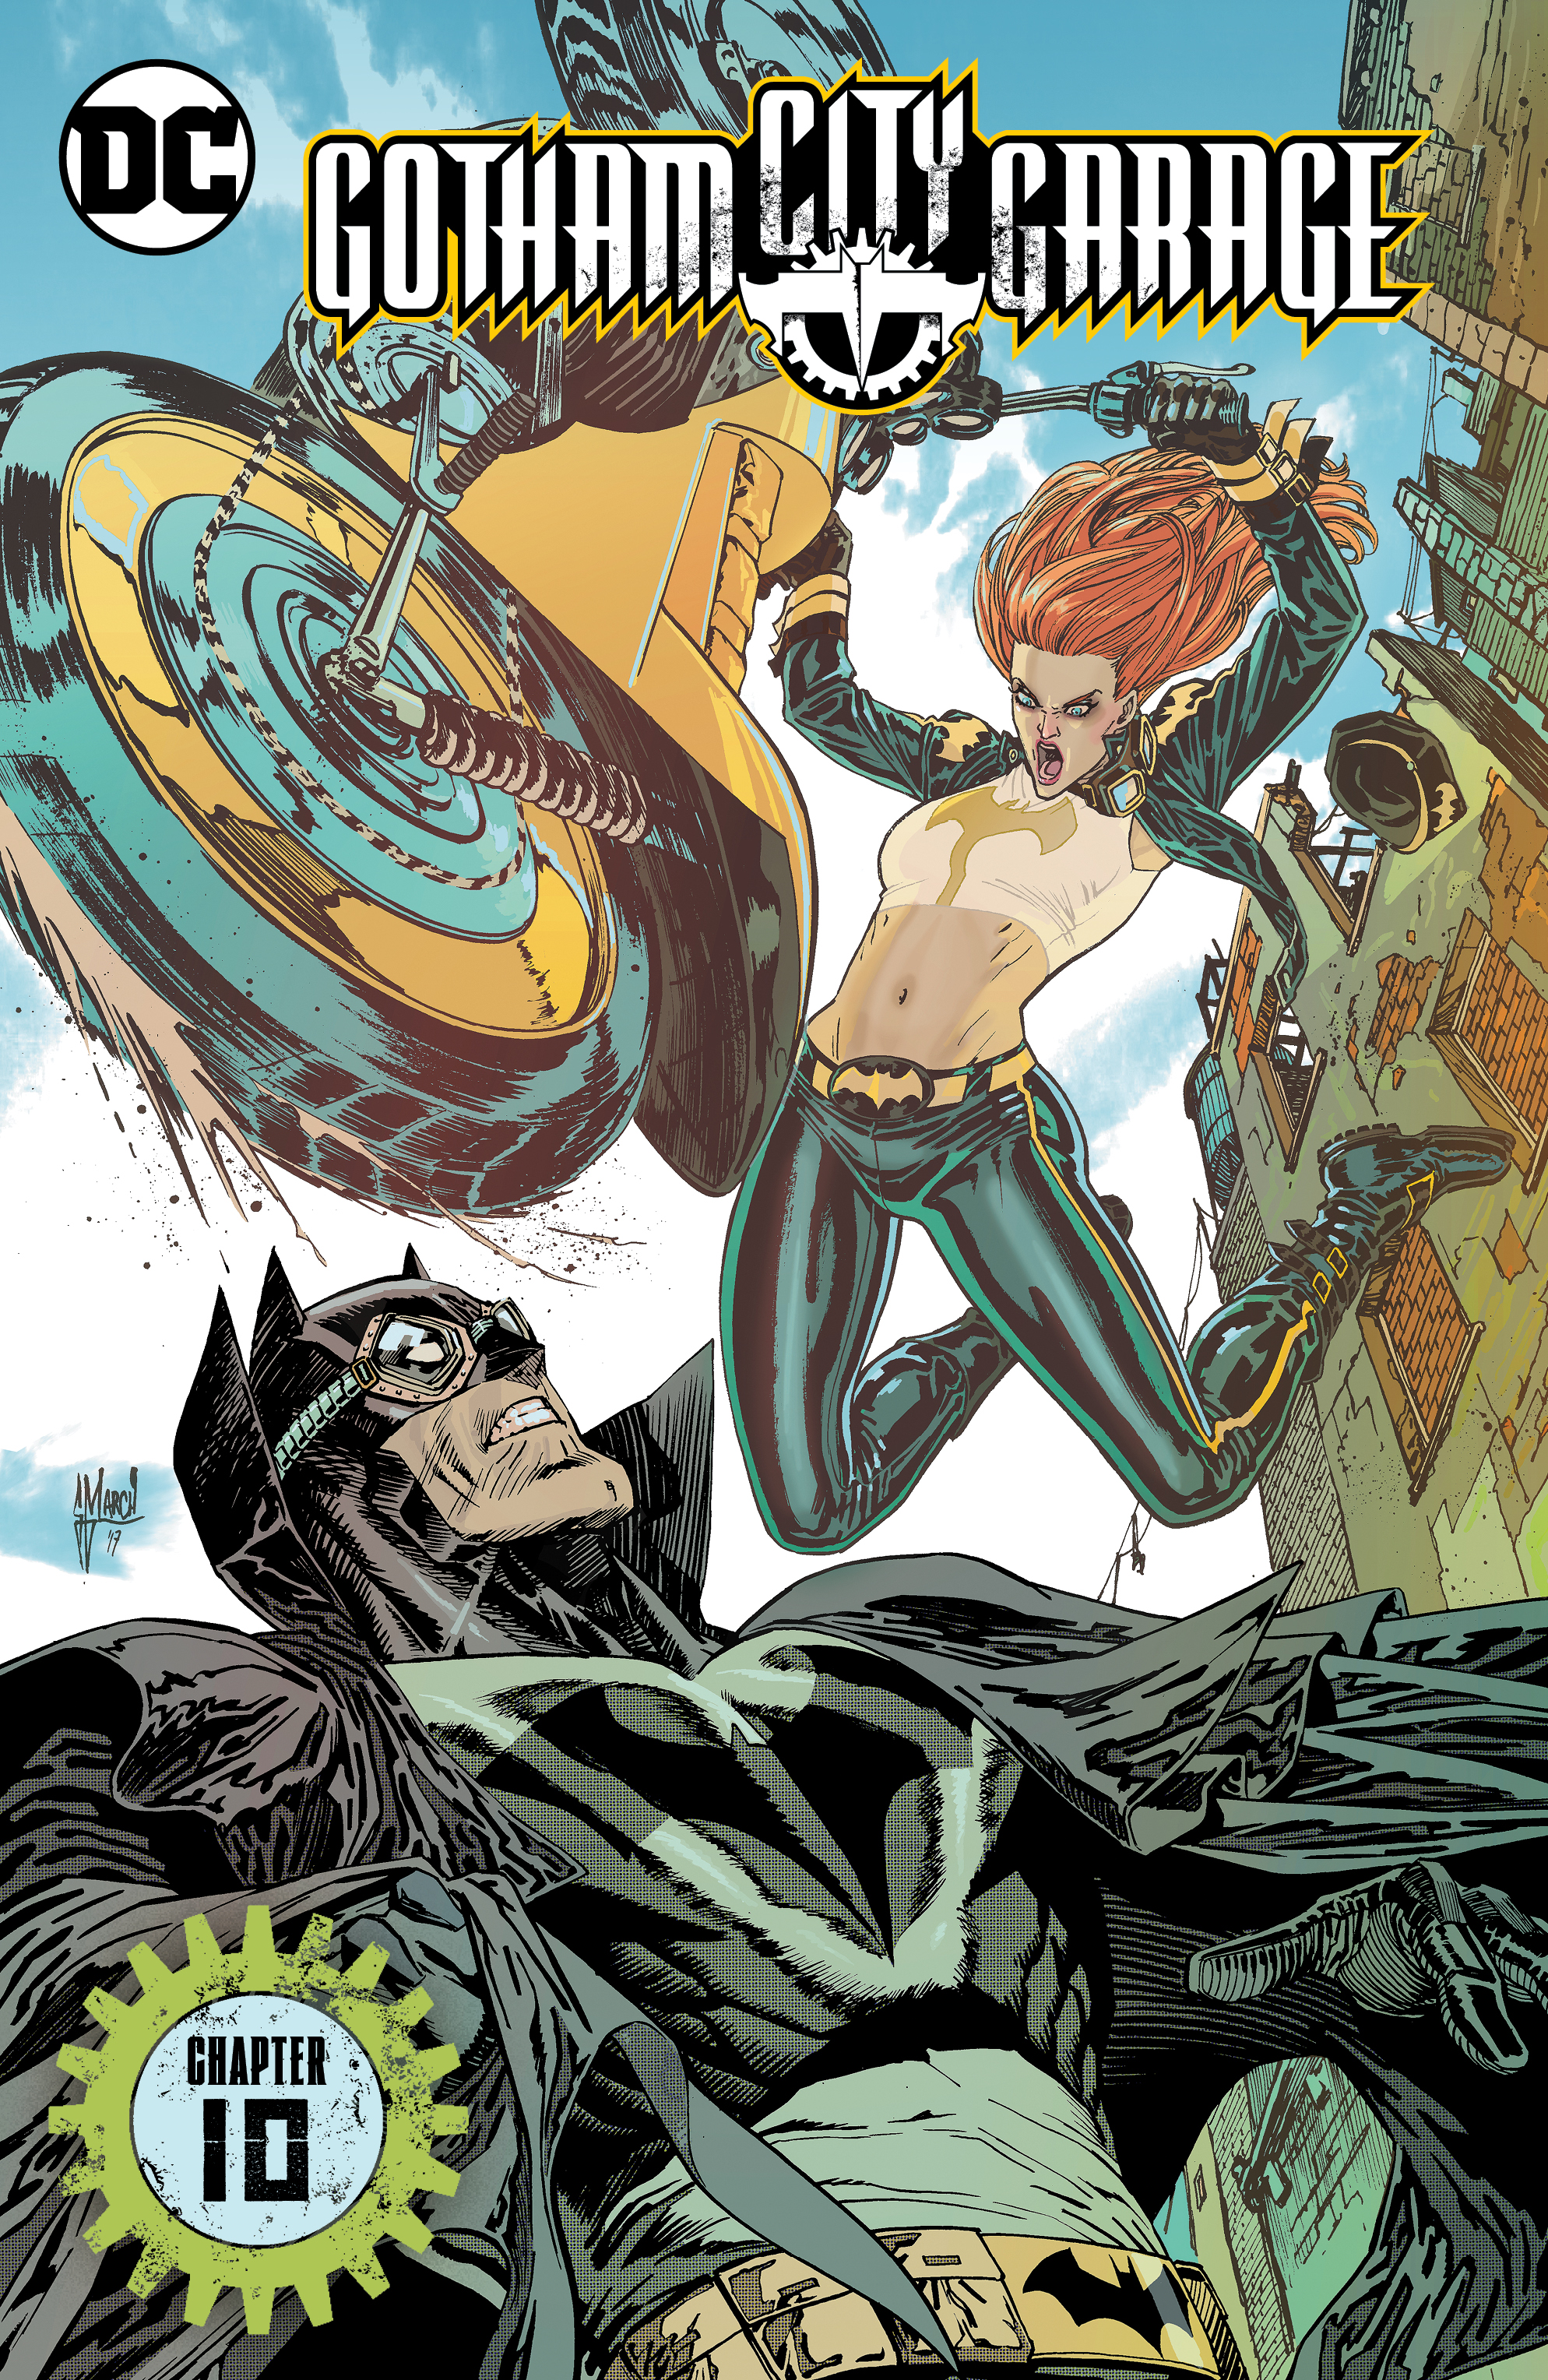 Gotham City Garage #10 preview images